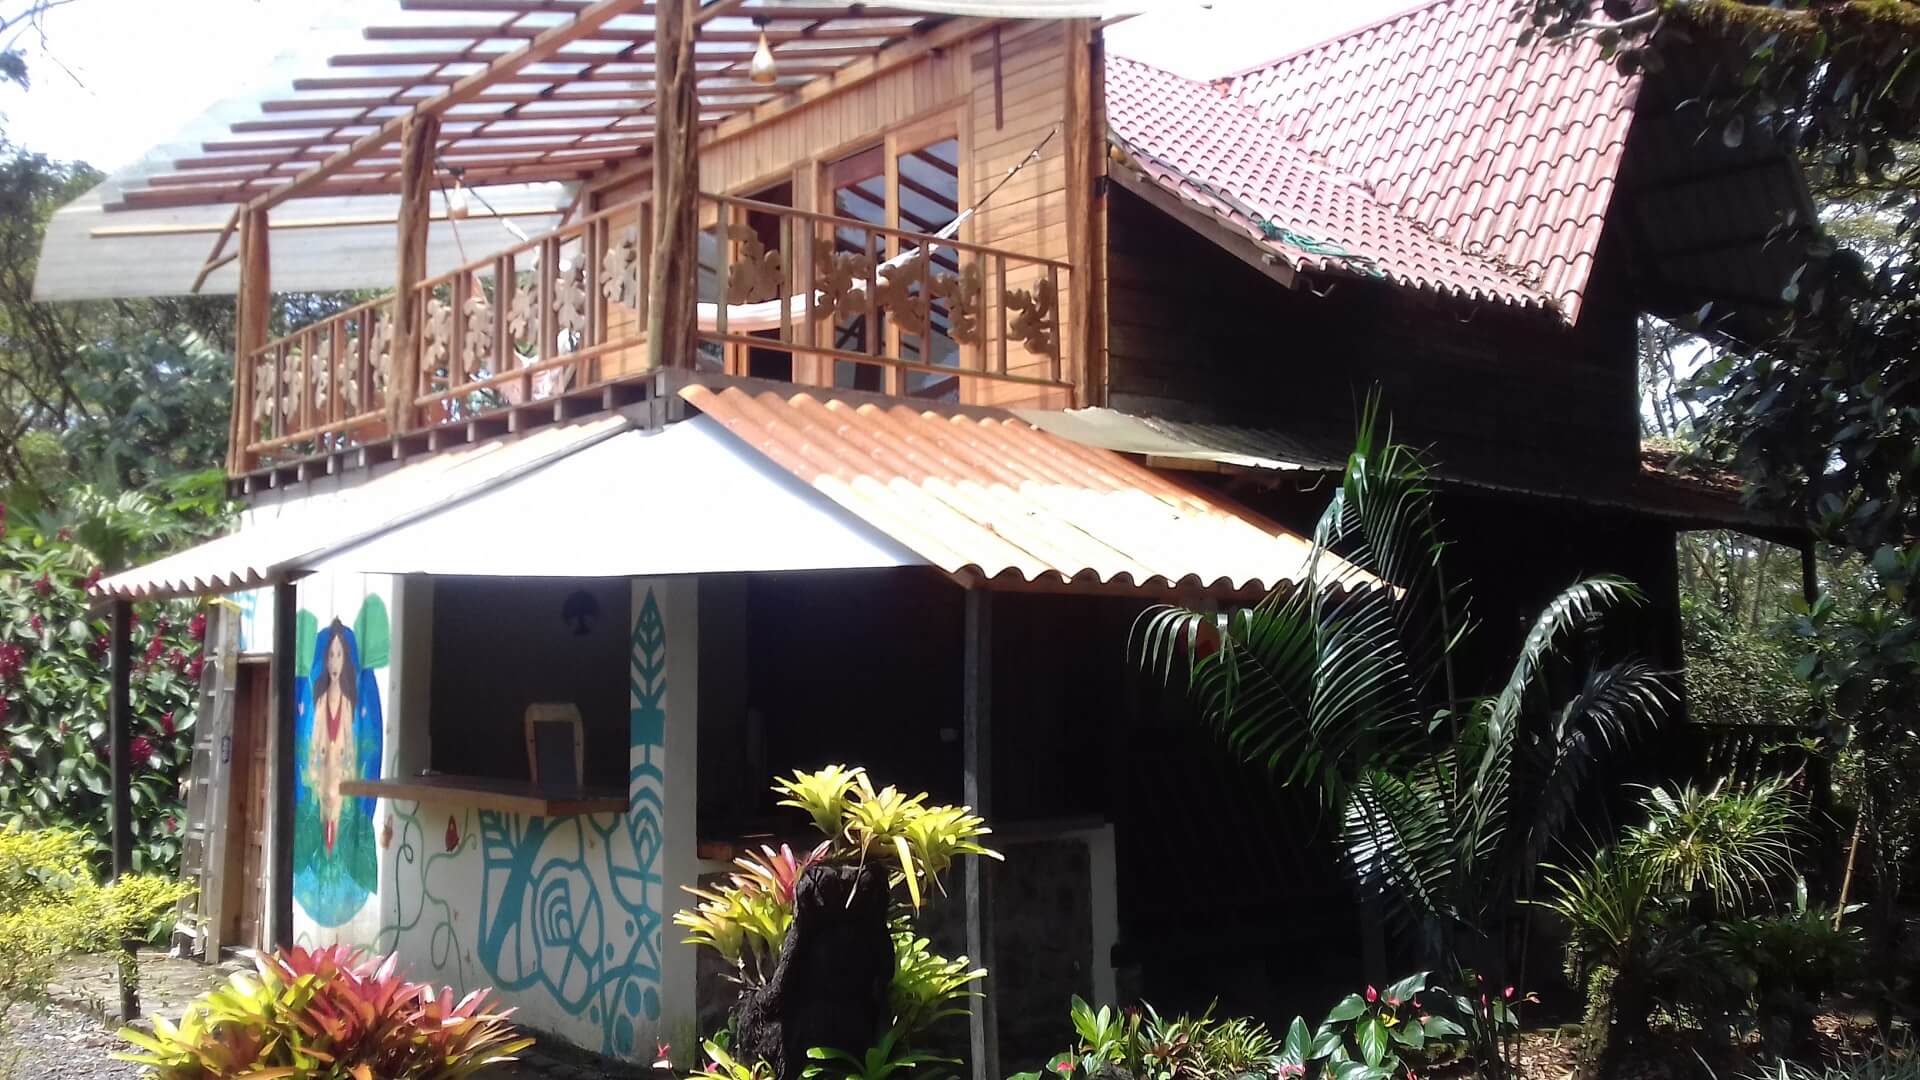 Learn about Amazon Permaculture at Los Yapas Holistic Center with Impactful Travel in Ecuador